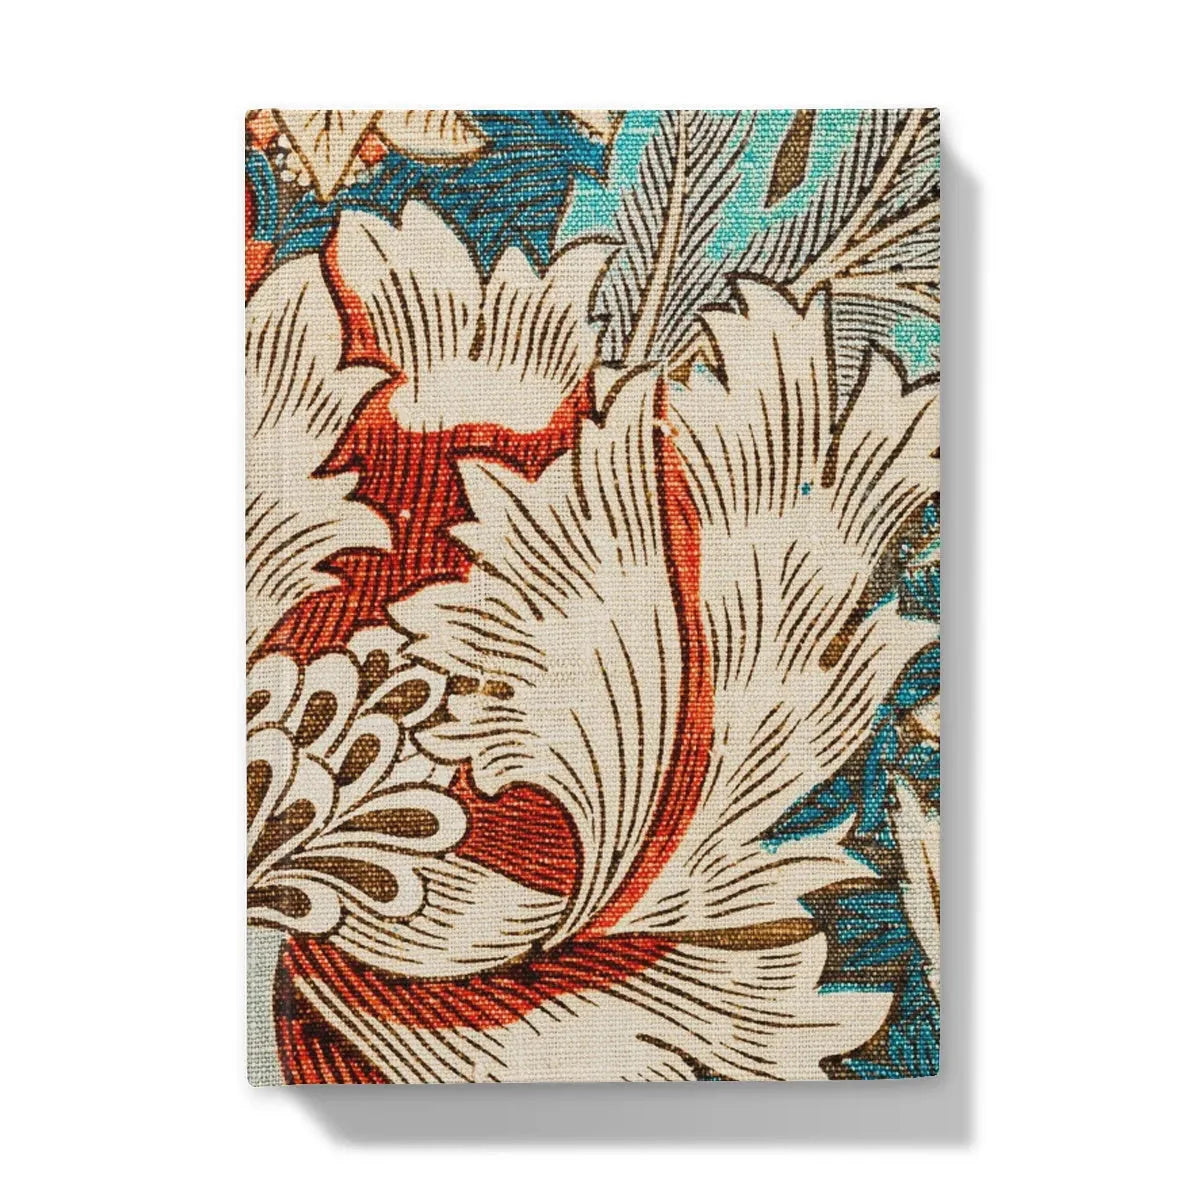 Honeysuckle Too By William Morris Hardback Journal - 5’x7’ / 5’ x 7’ - Lined Paper - Notebooks & Notepads